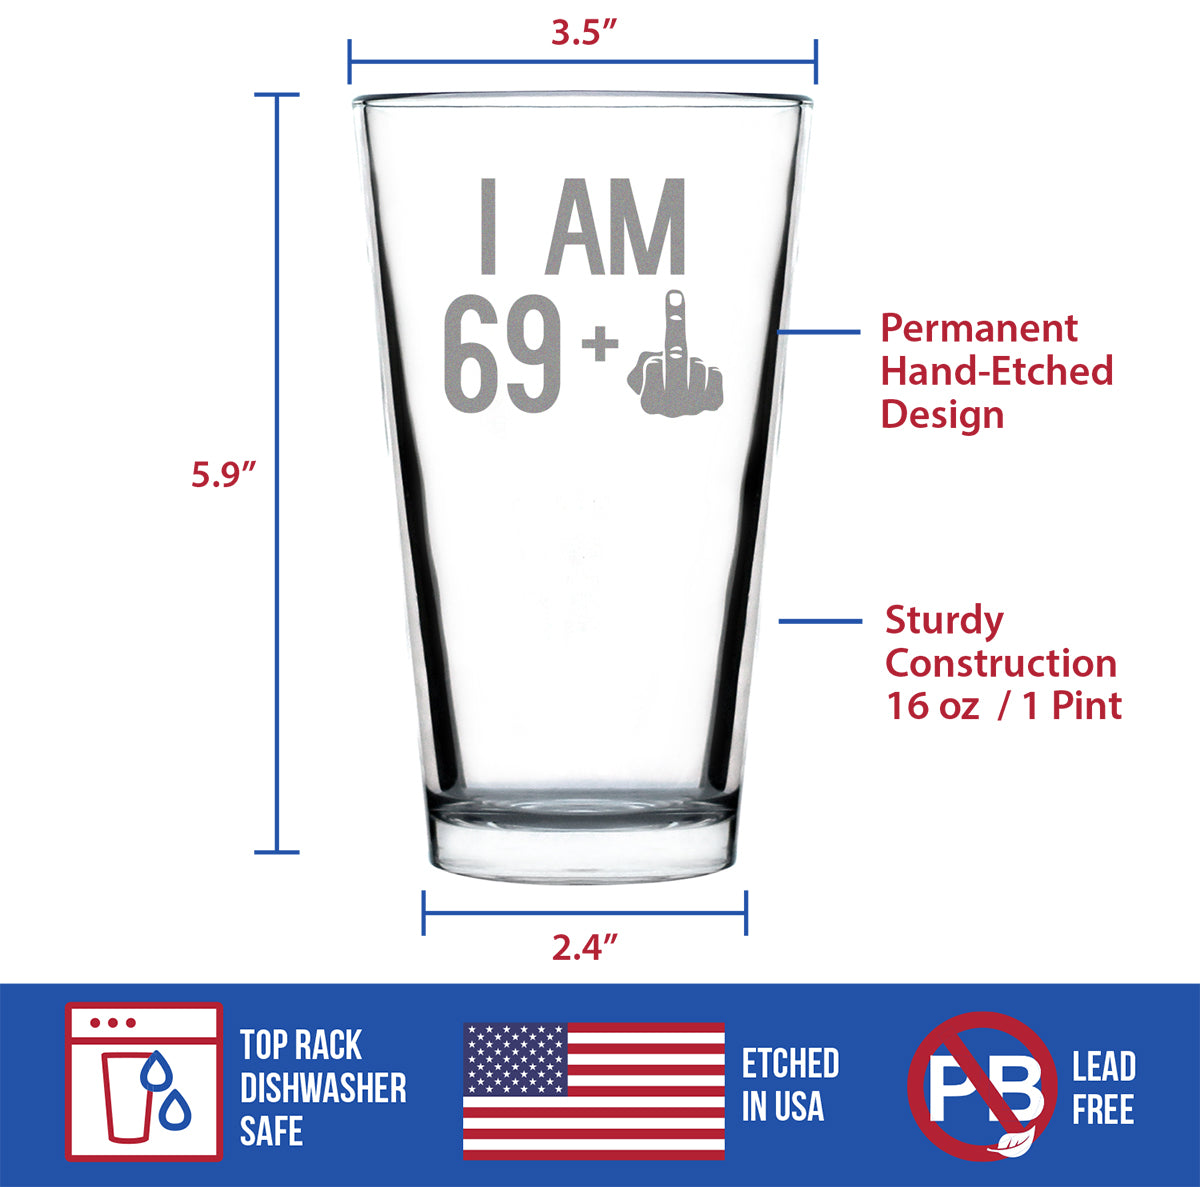 69 + 1 Middle Finger - 16 oz Pint Glass for Beer - Funny 70th Birthday Gifts for Men Turning 70